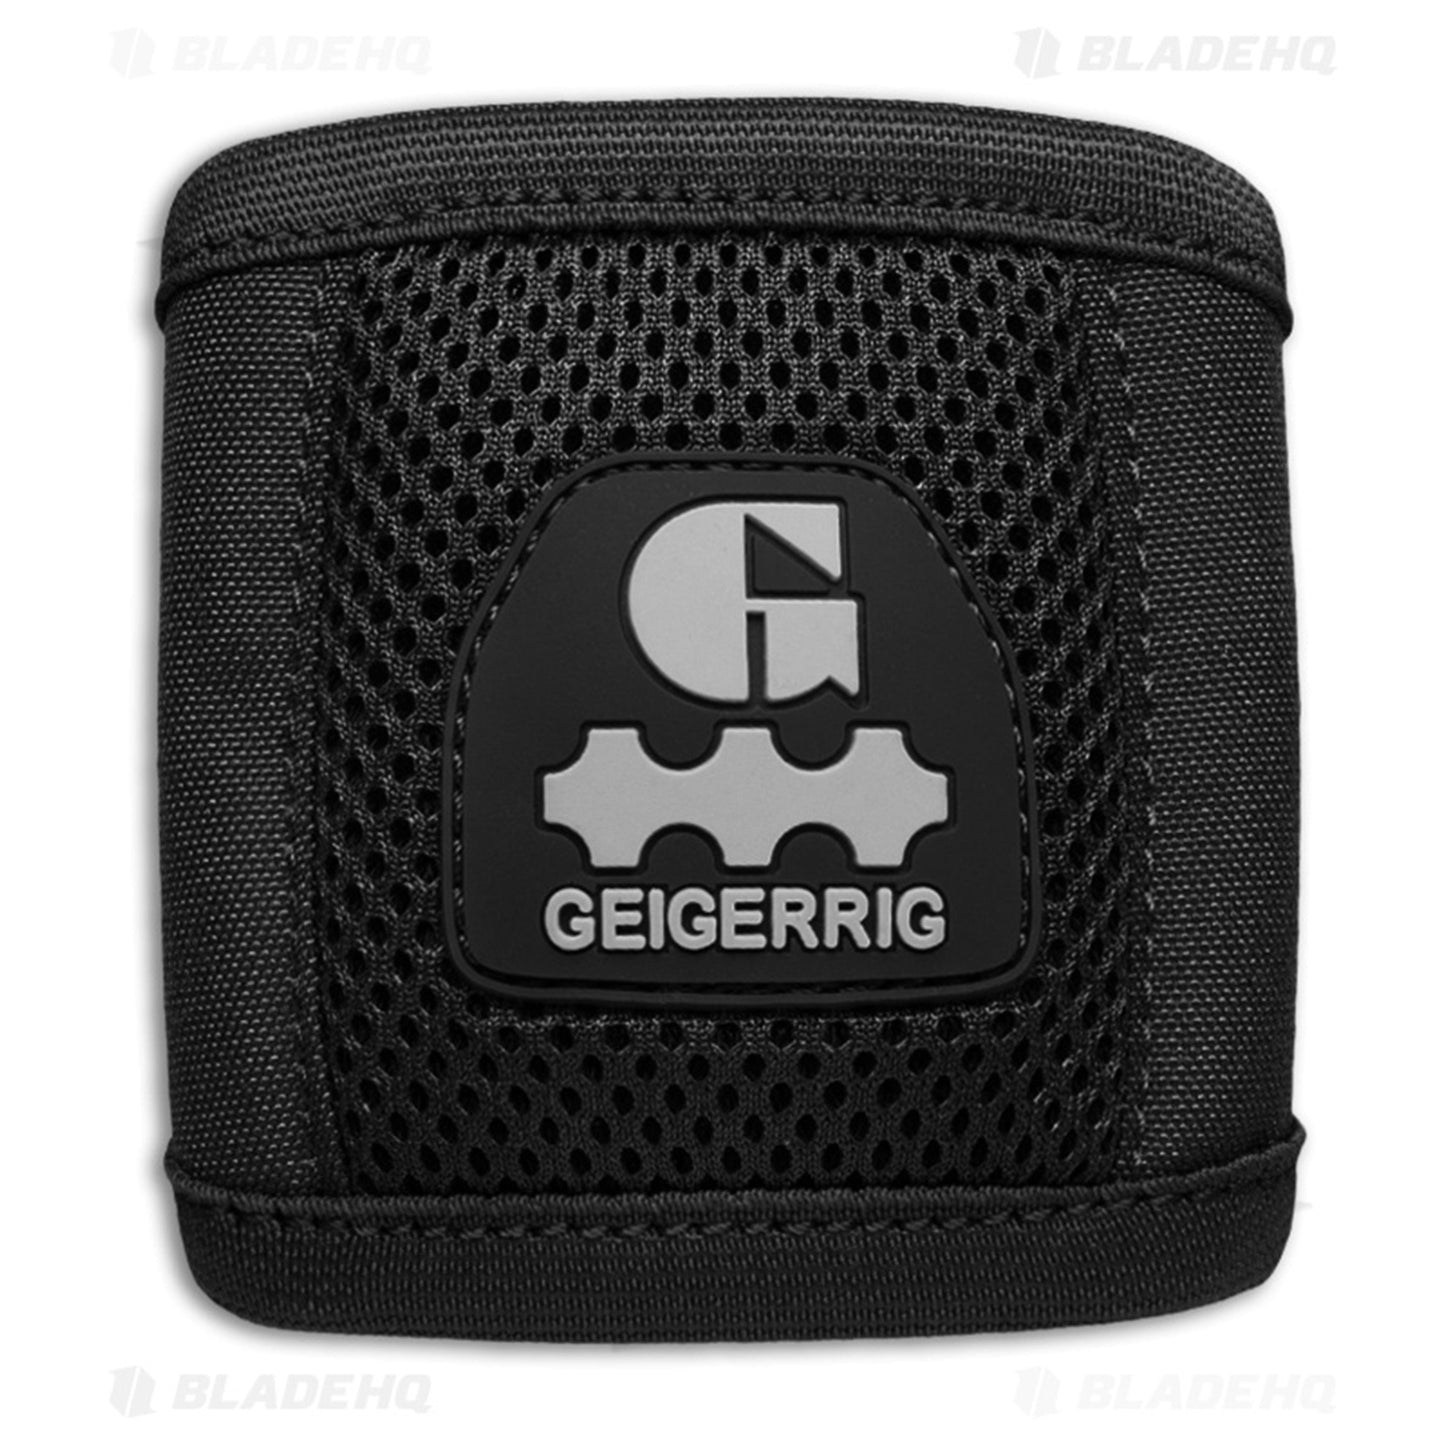 Geigerrig Tactical Power Bulb Holder Big Adventure Outfitters